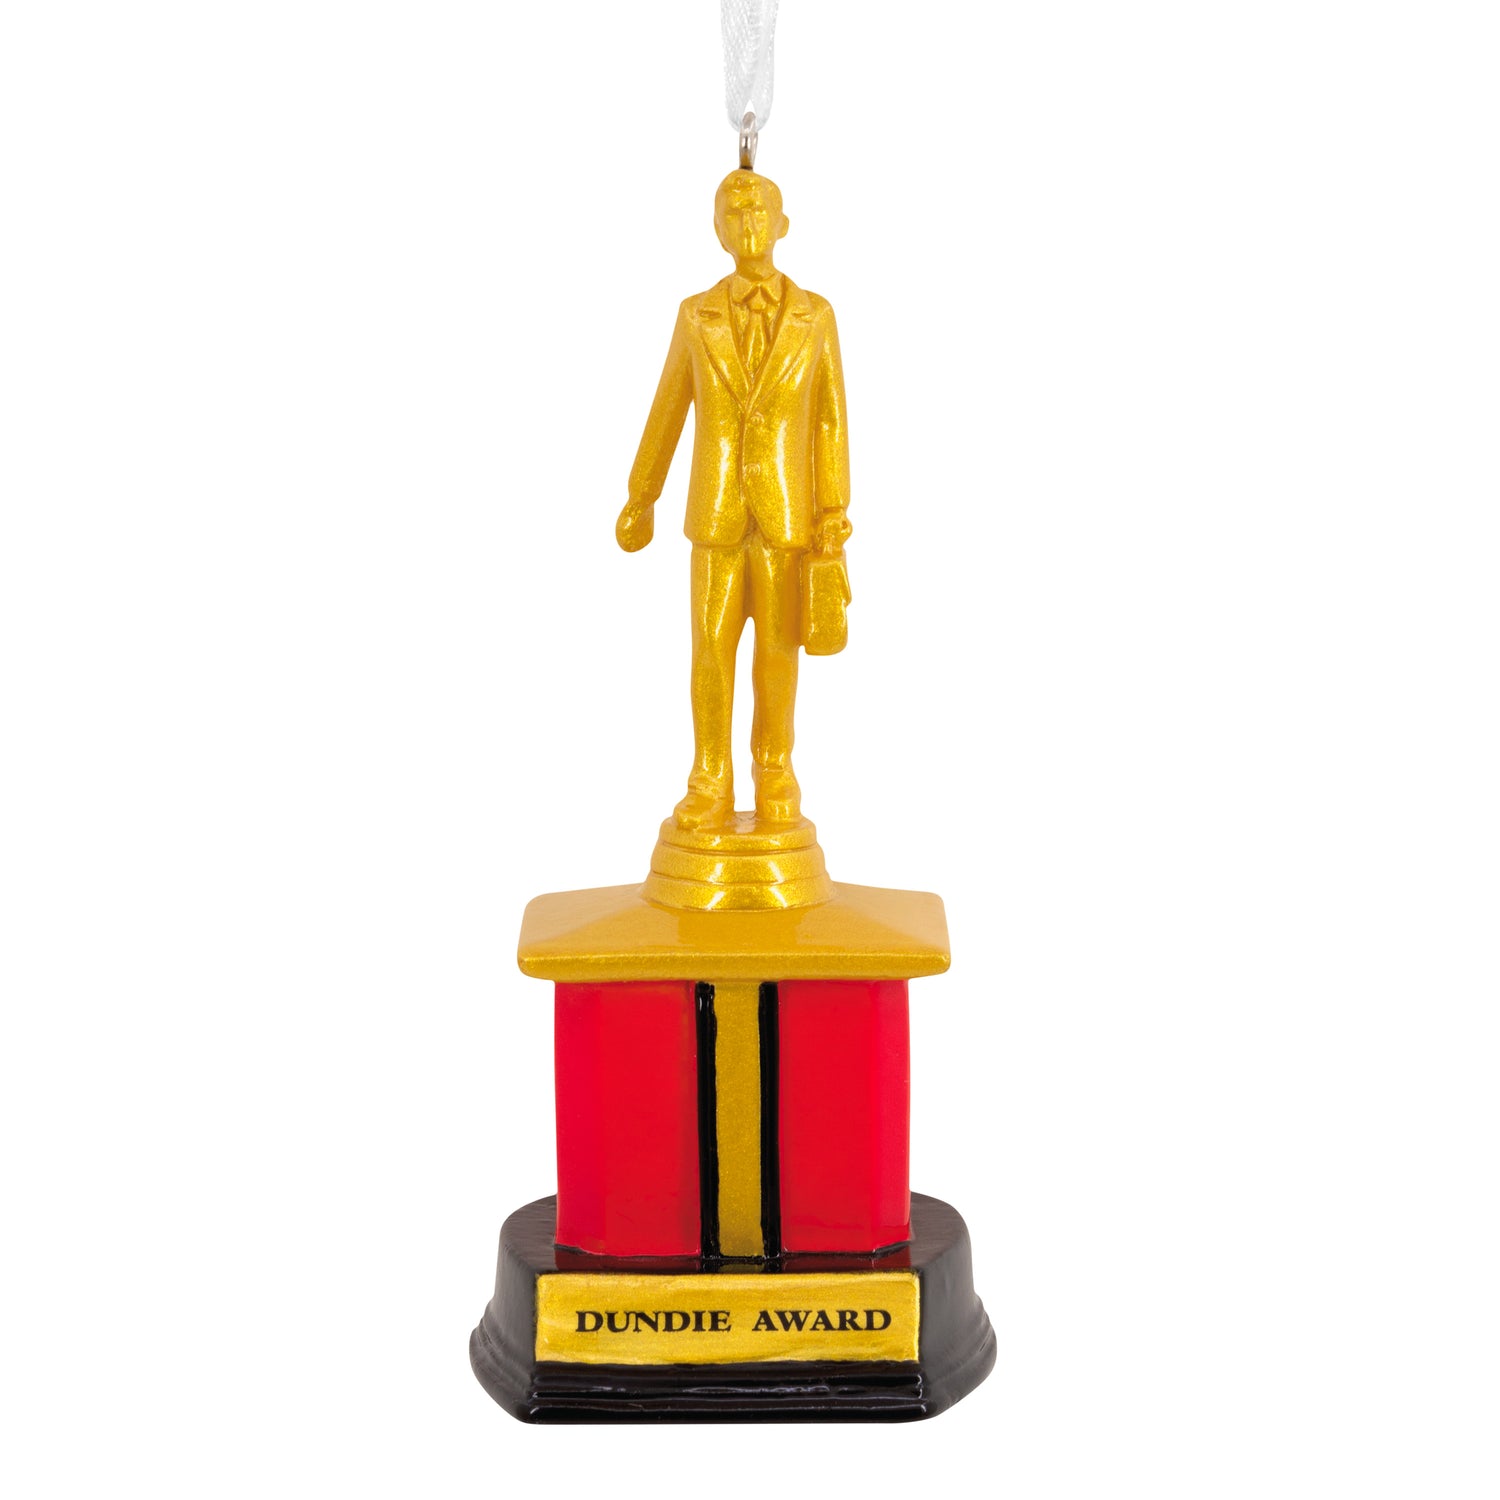 The Office Dundie Award Ornament